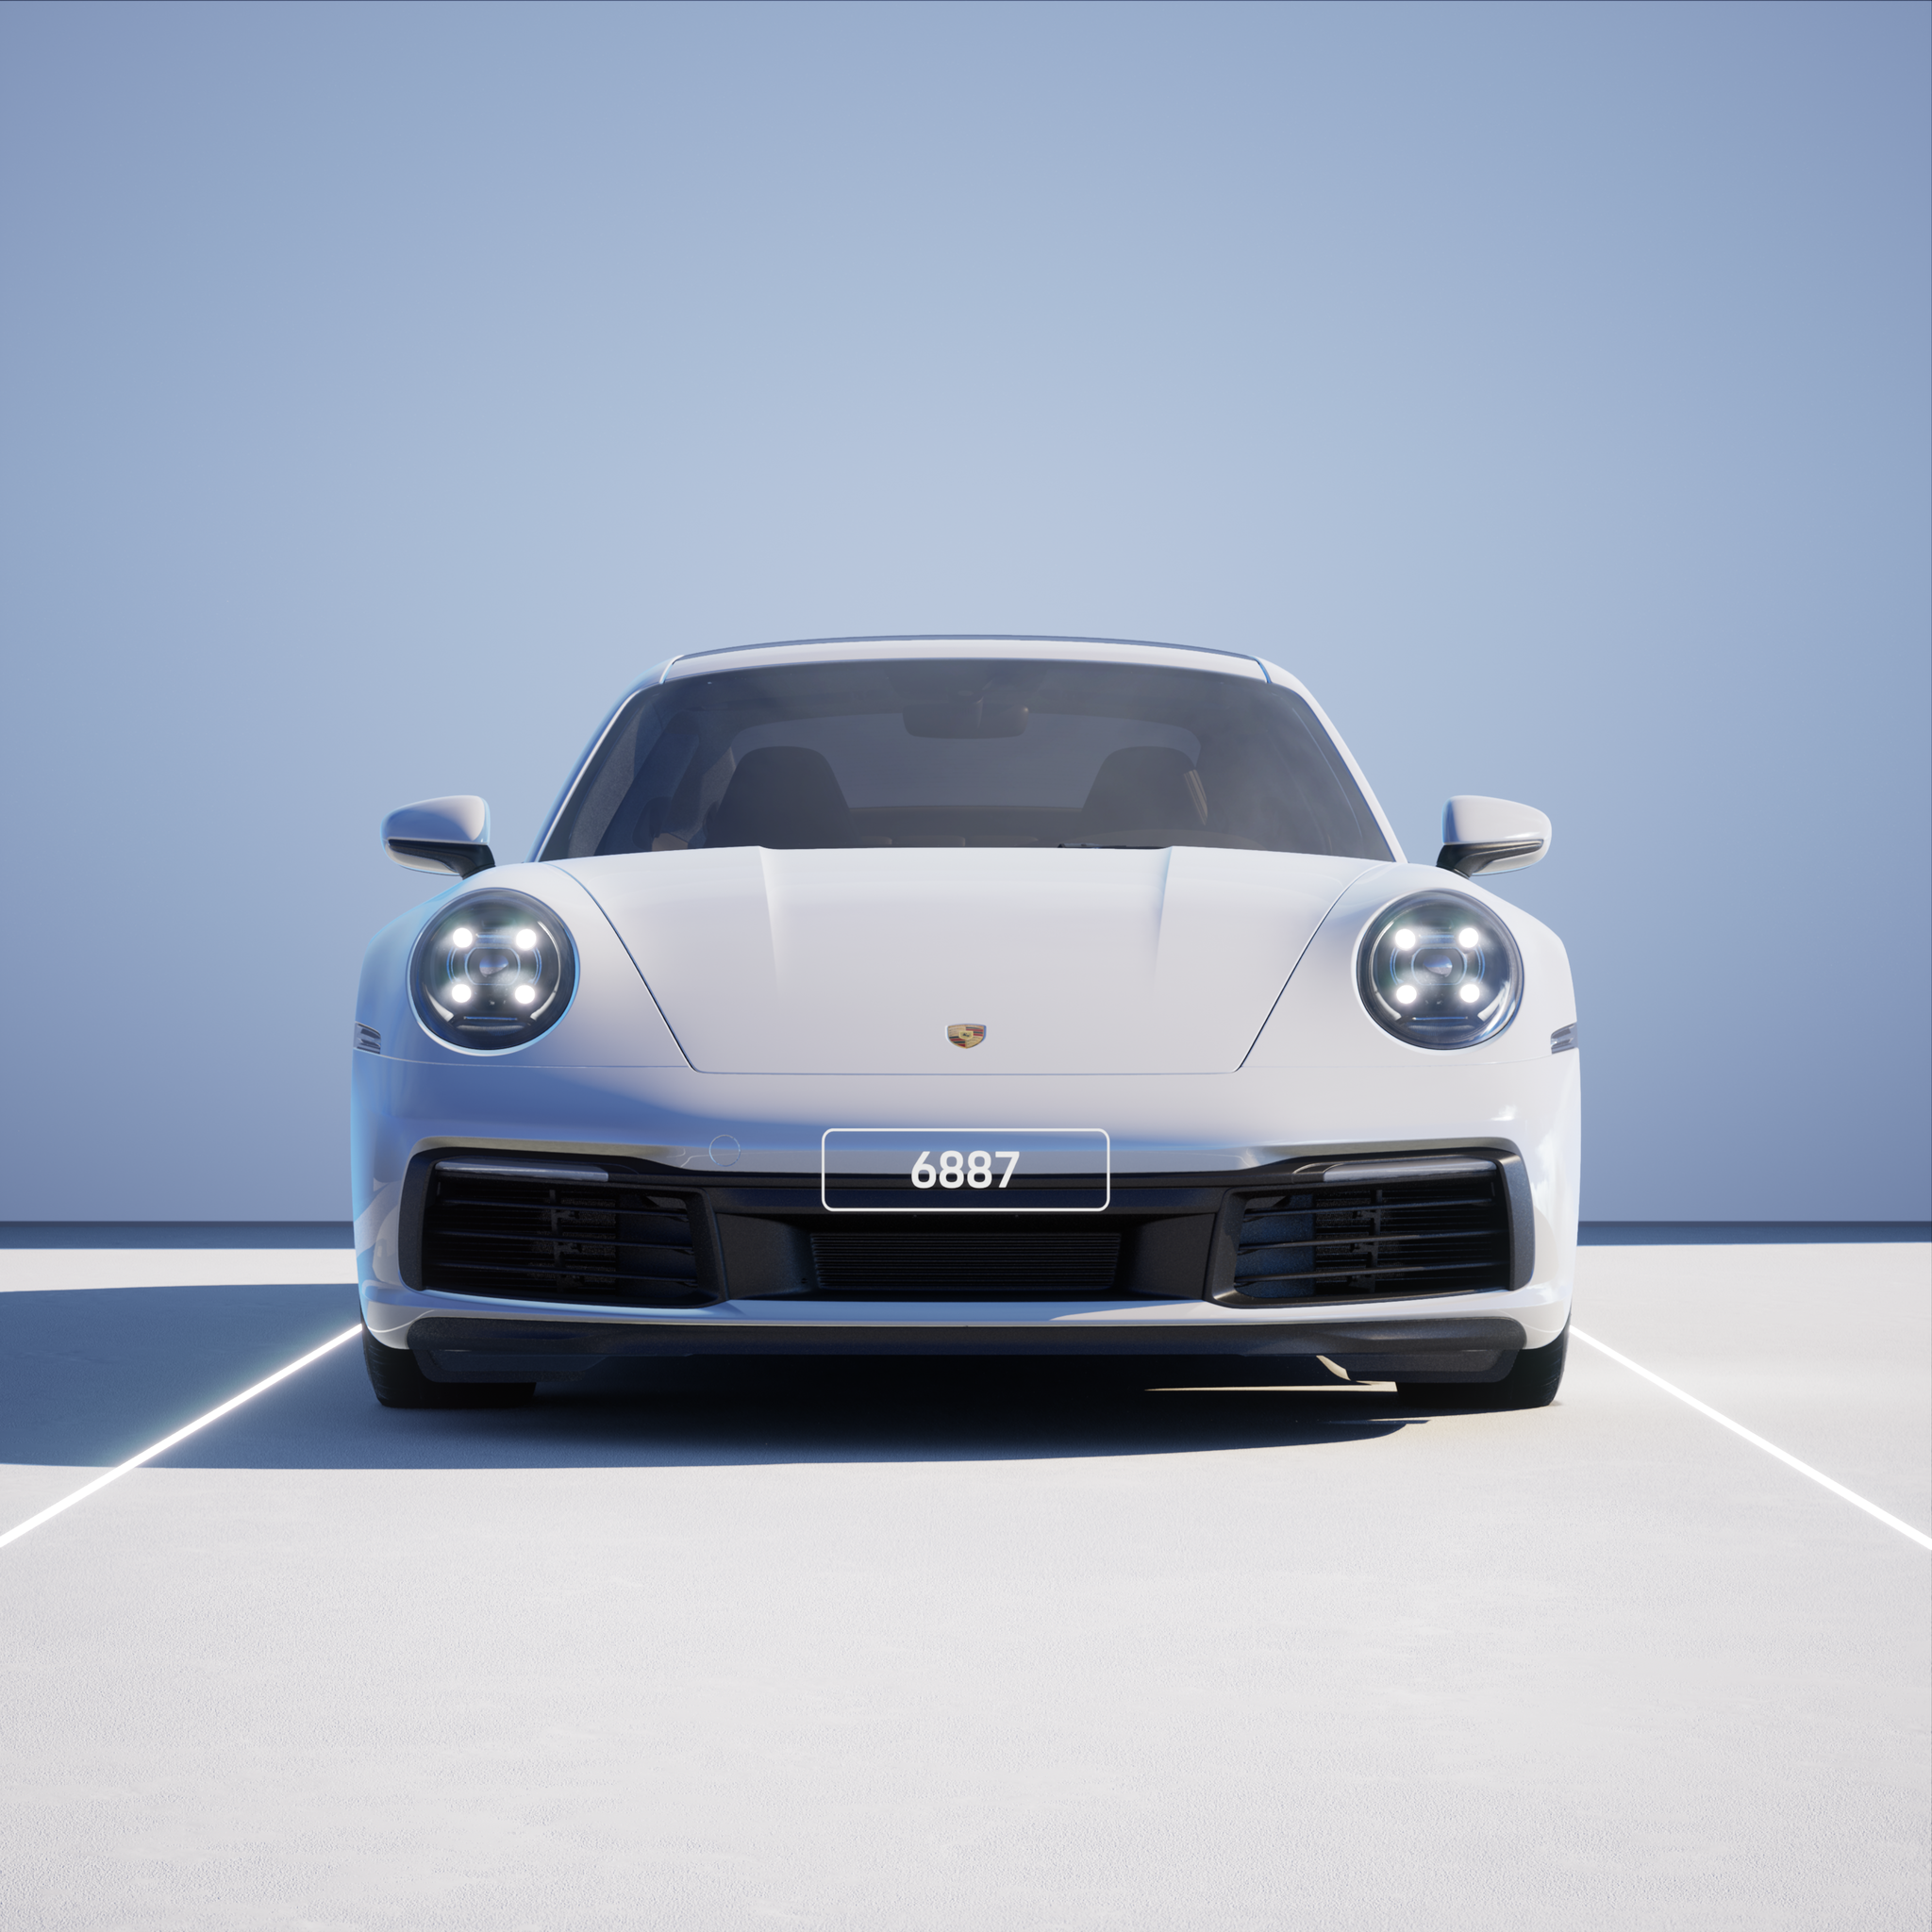 The PORSCHΞ 911 6887 image in phase